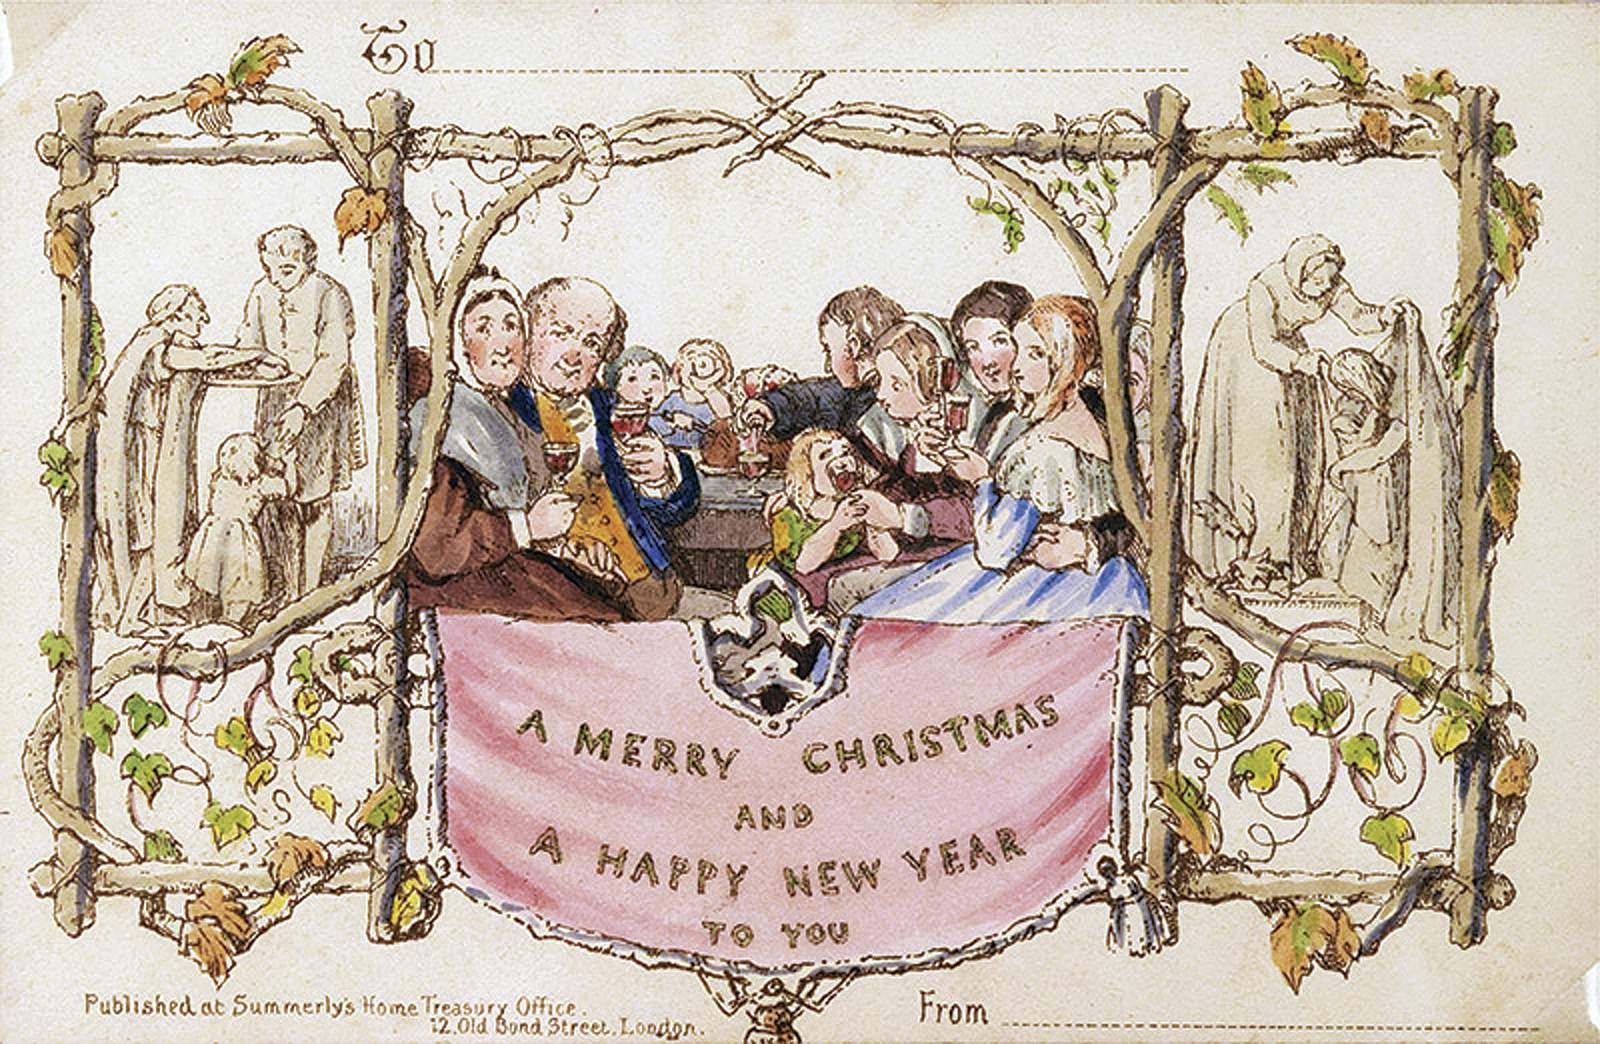 Cheers! Or not: 'Scandalous' 1st Christmas card up for sale